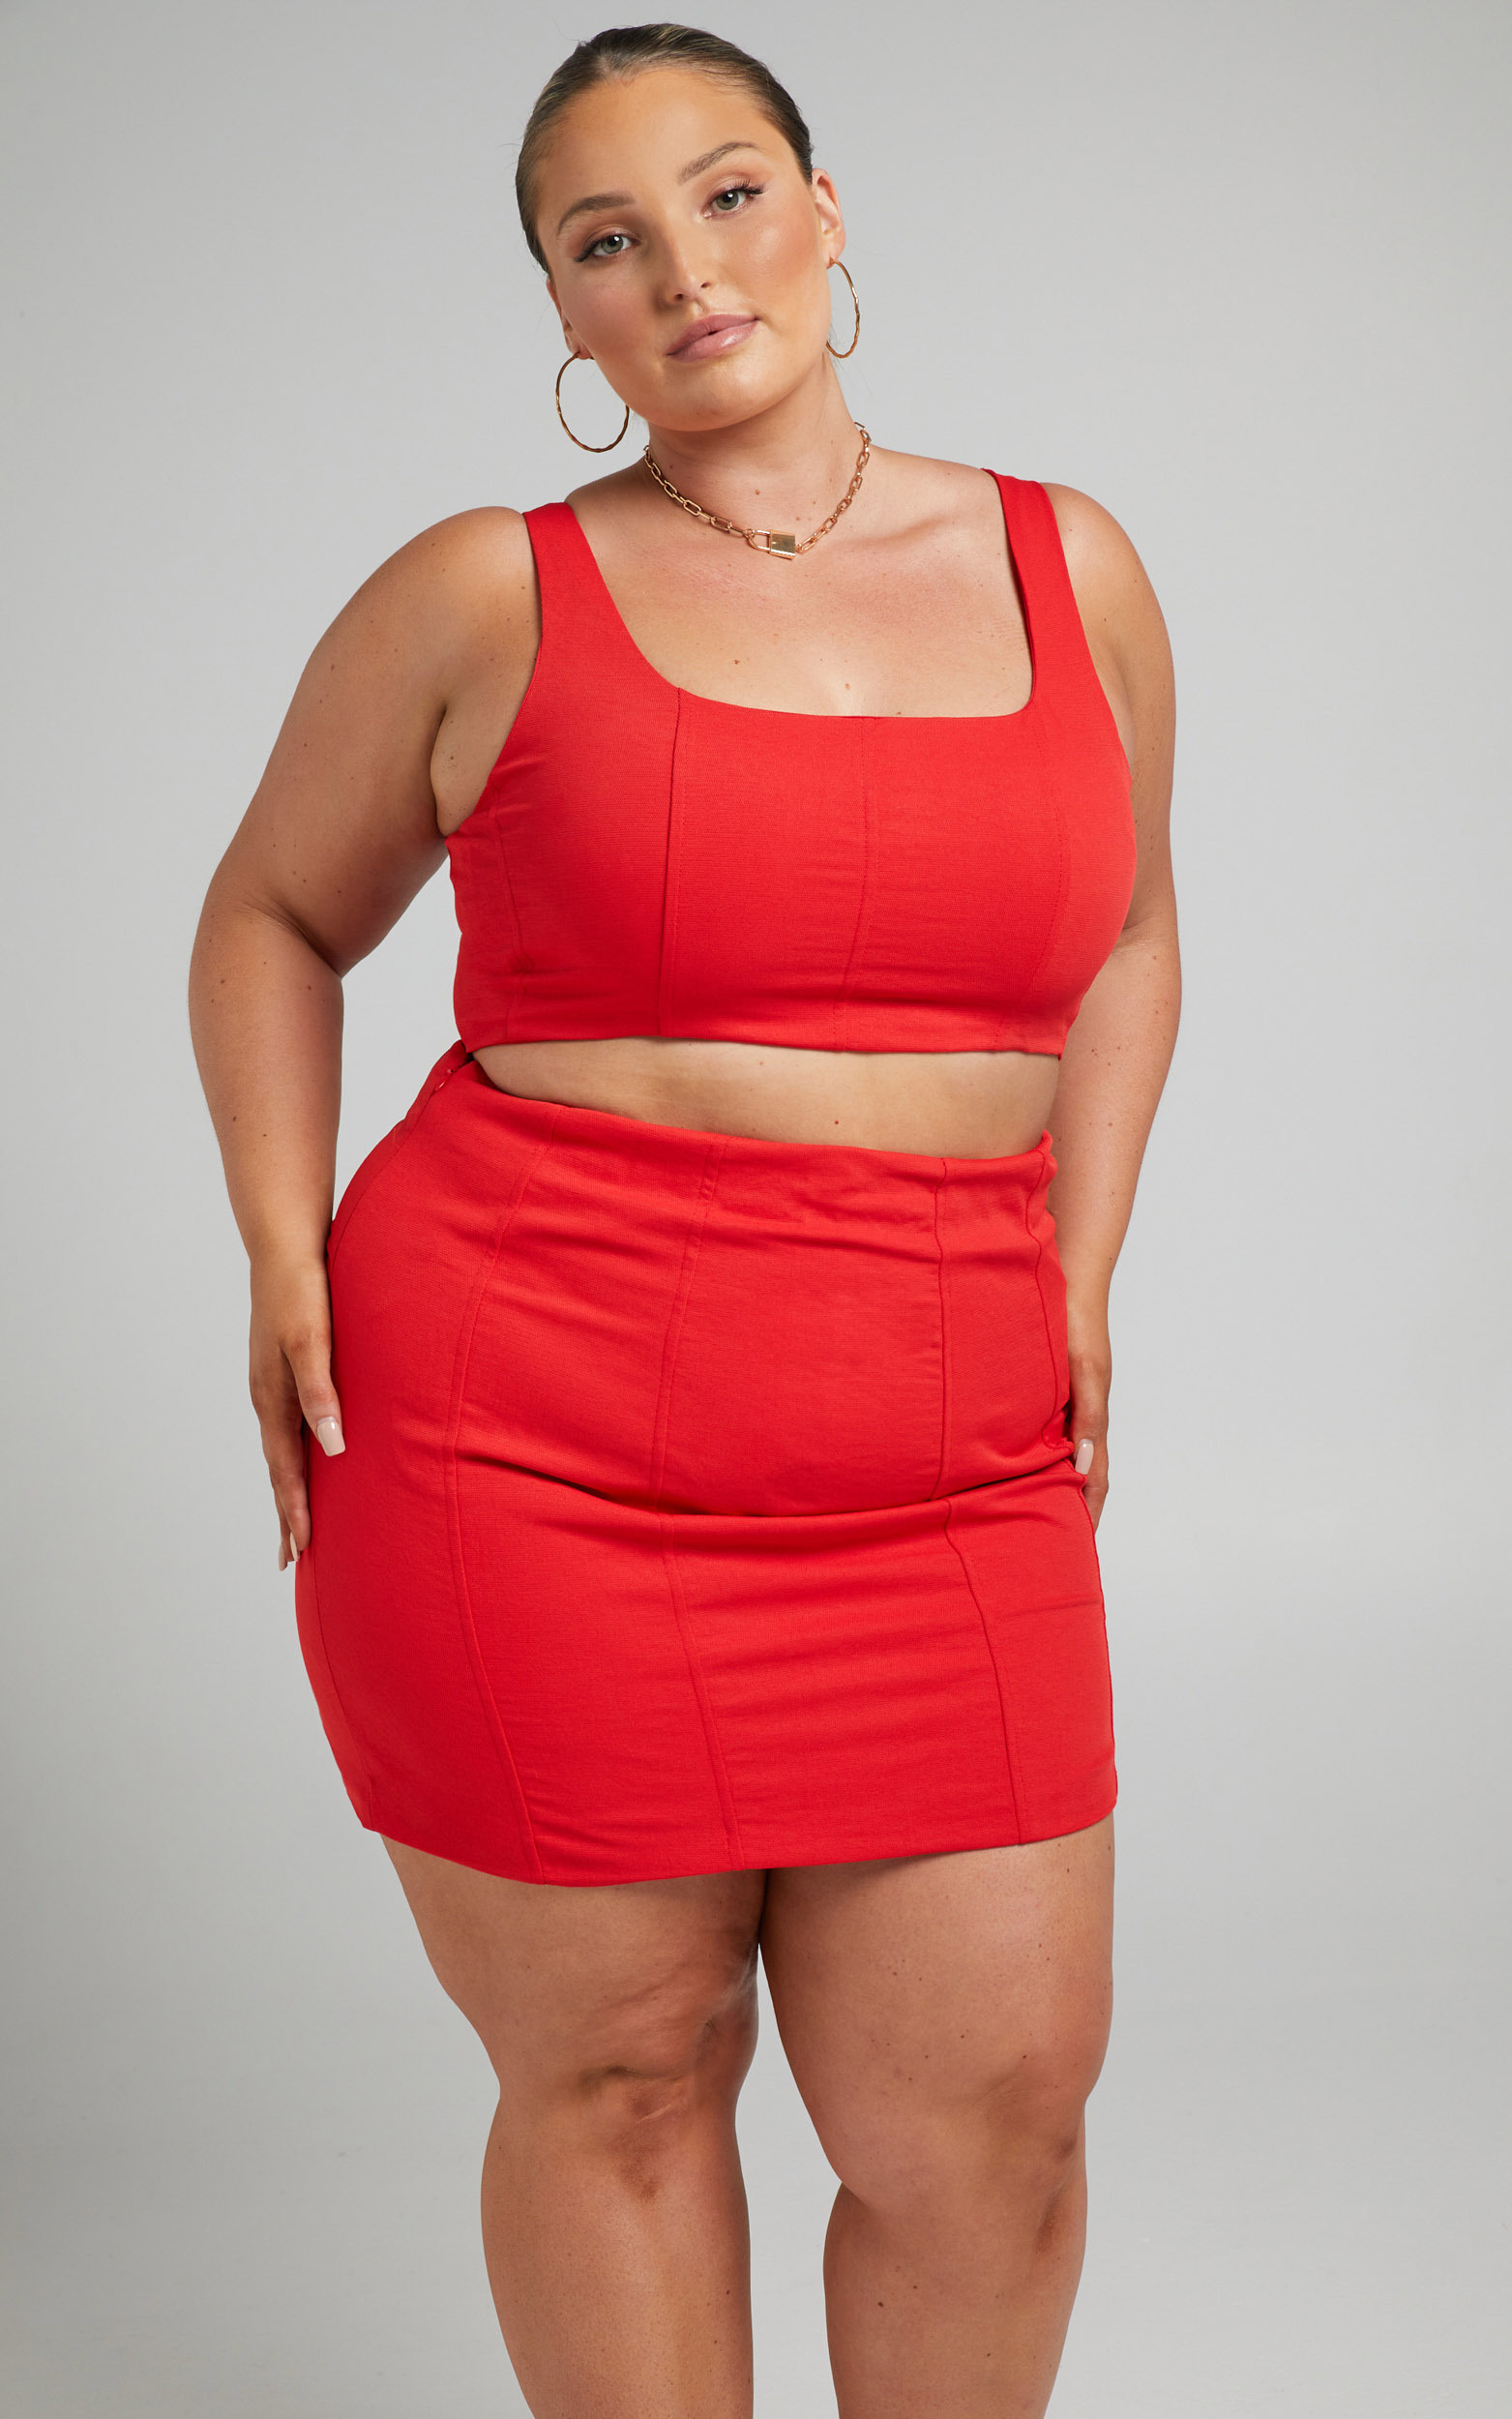 Mayling Panelled Mini Skirt in Oxy Fire - 06, RED1, hi-res image number null